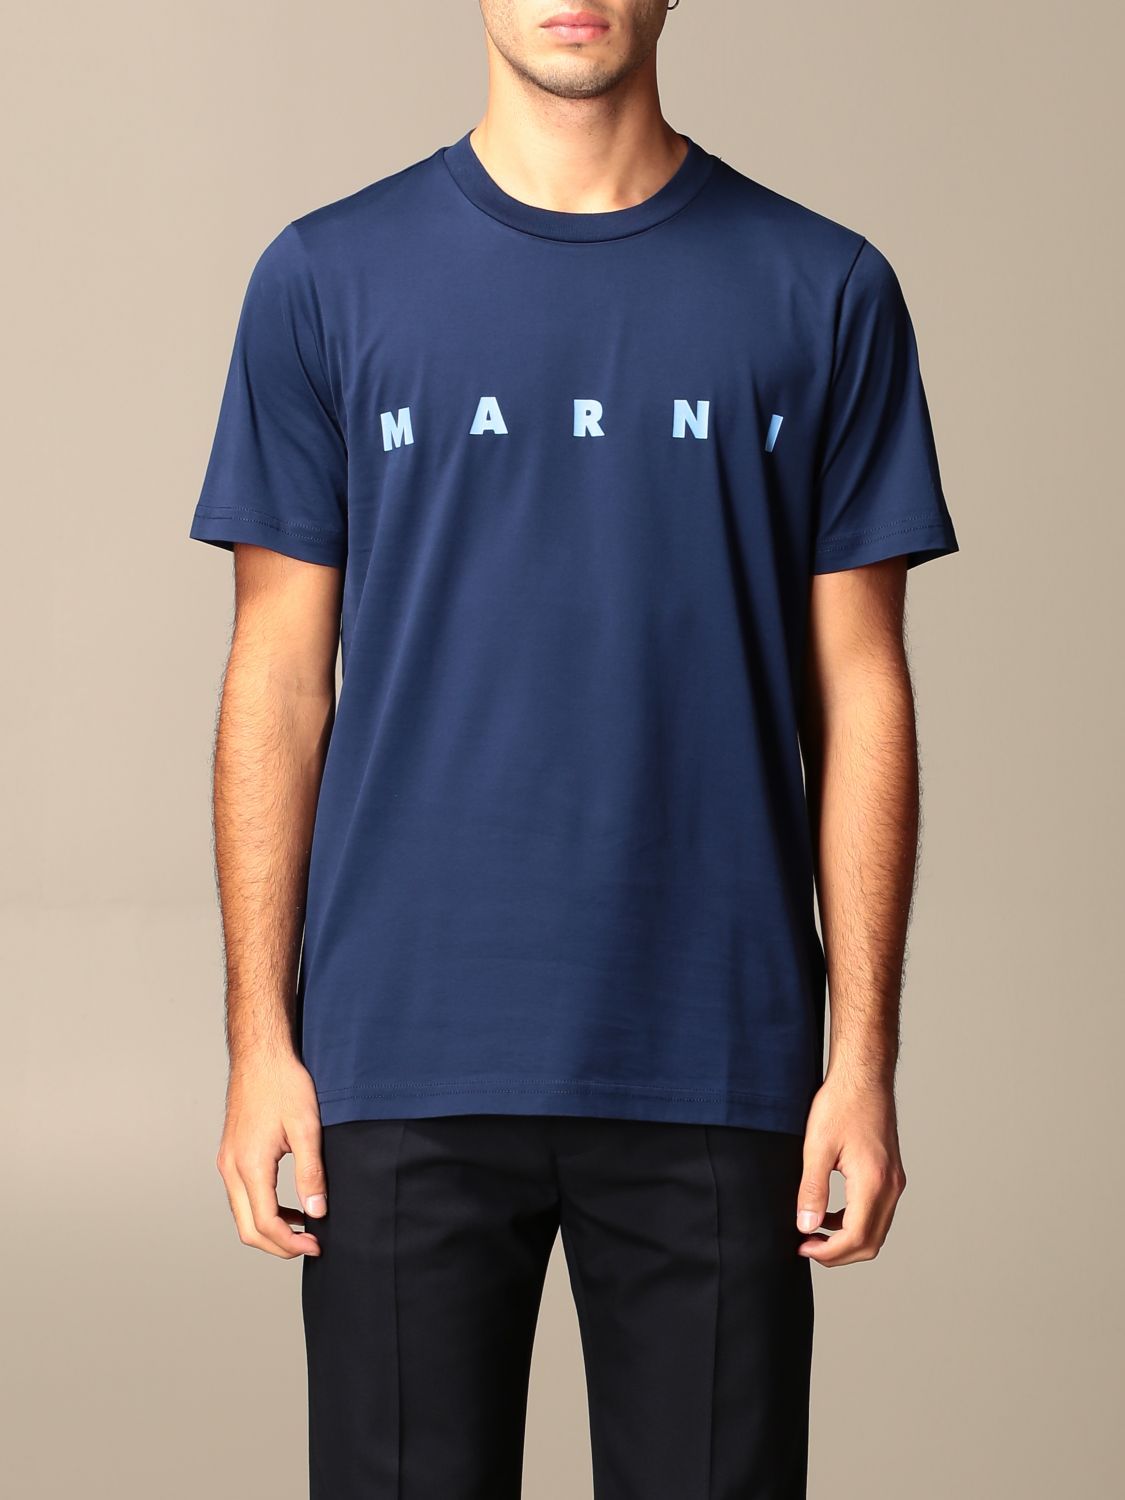 Marni Outlet: cotton t-shirt with logo - Navy | Marni t-shirt ...